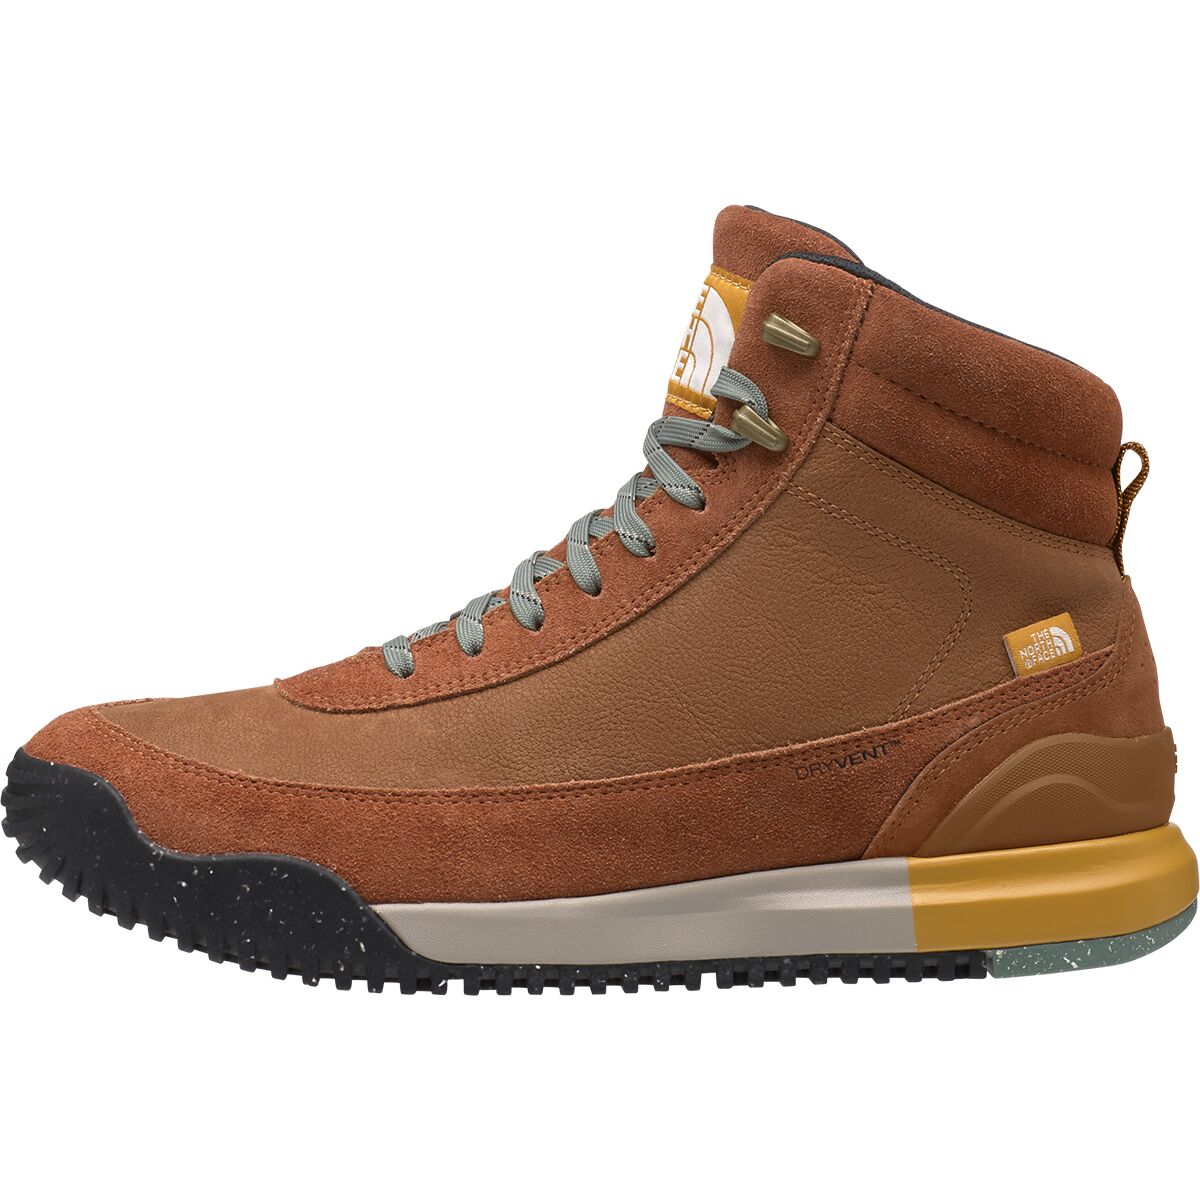 The North Face Back-To-Berkeley III Leather Waterproof Boot - Men's